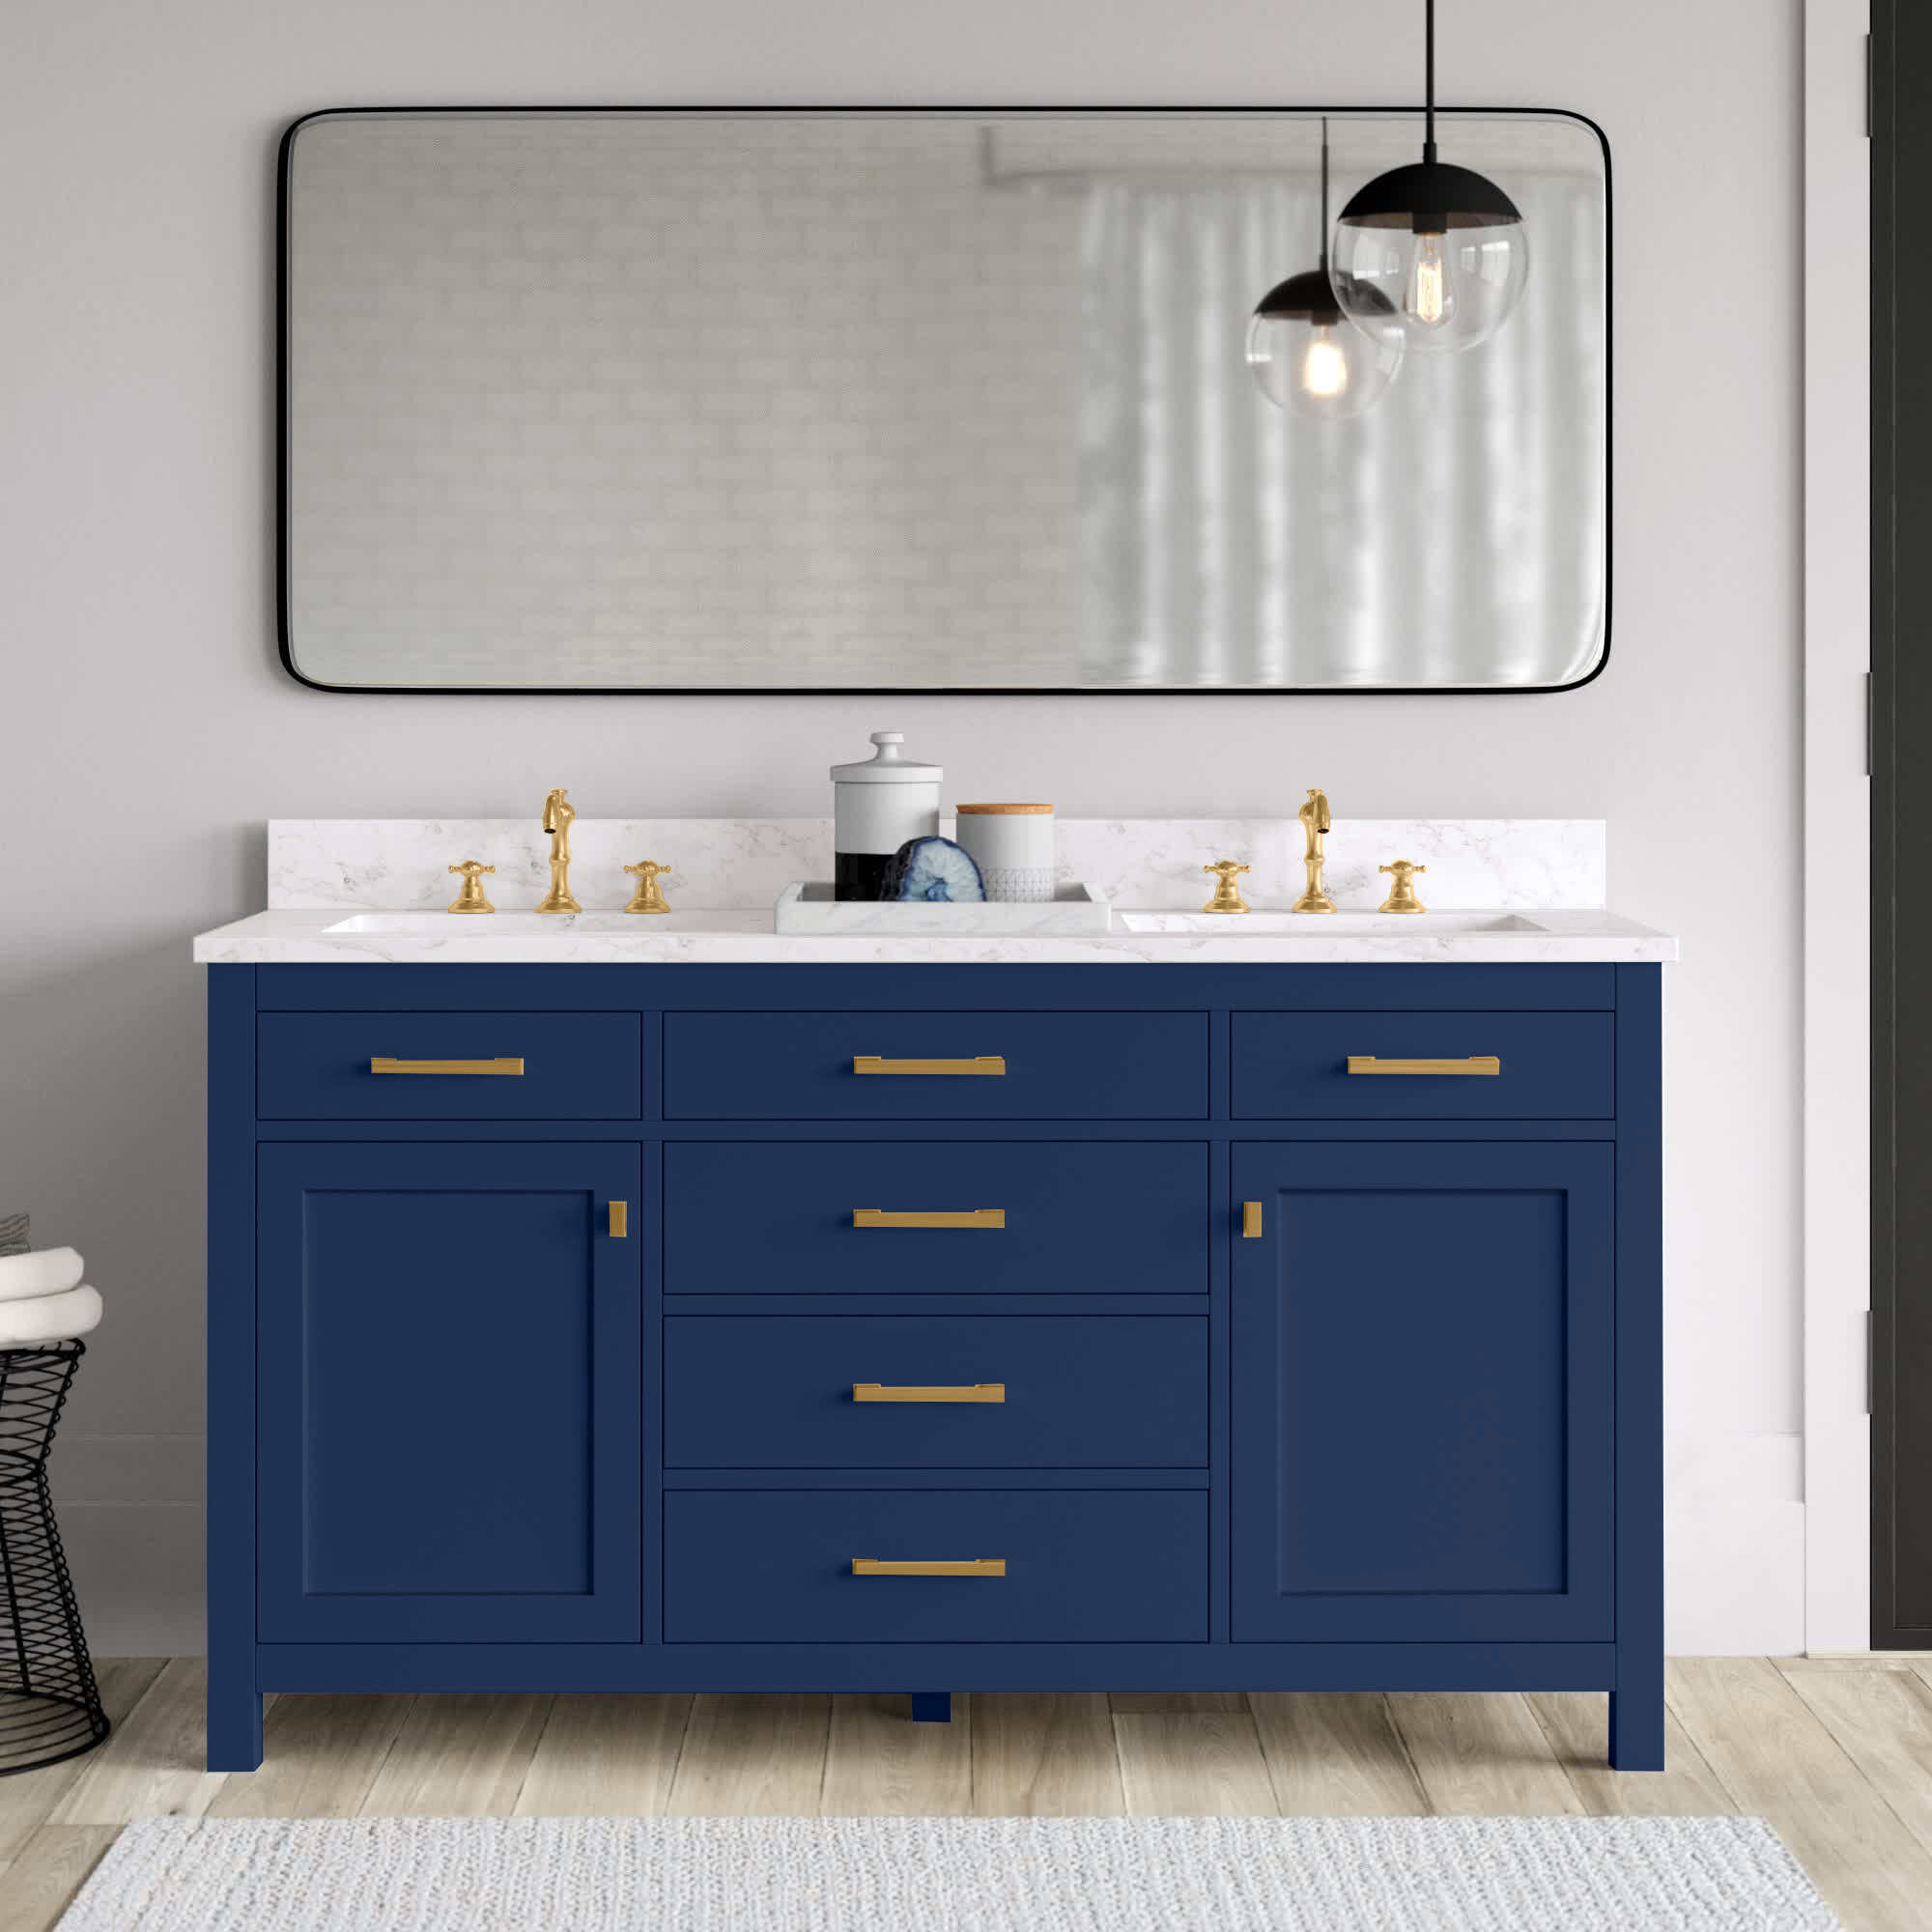 Shop High Quality Vanity Cabinet L-Shaped Pullout Organizer Online